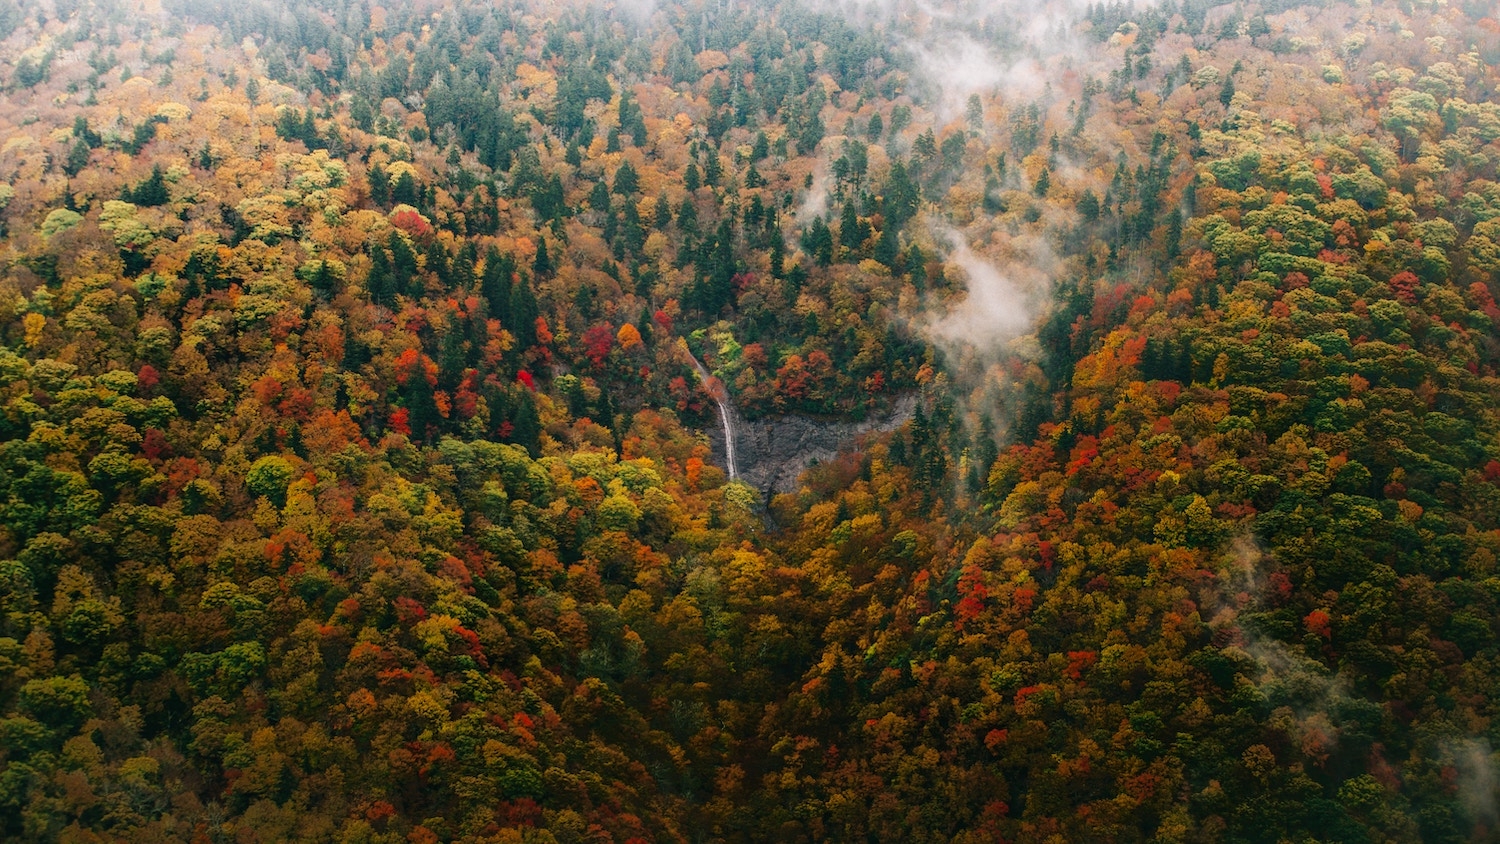 An aerial view of a forest in the fall - Fall Foliage in North Carolina: What to Expect This Year - College of Natural Resources at NC State University